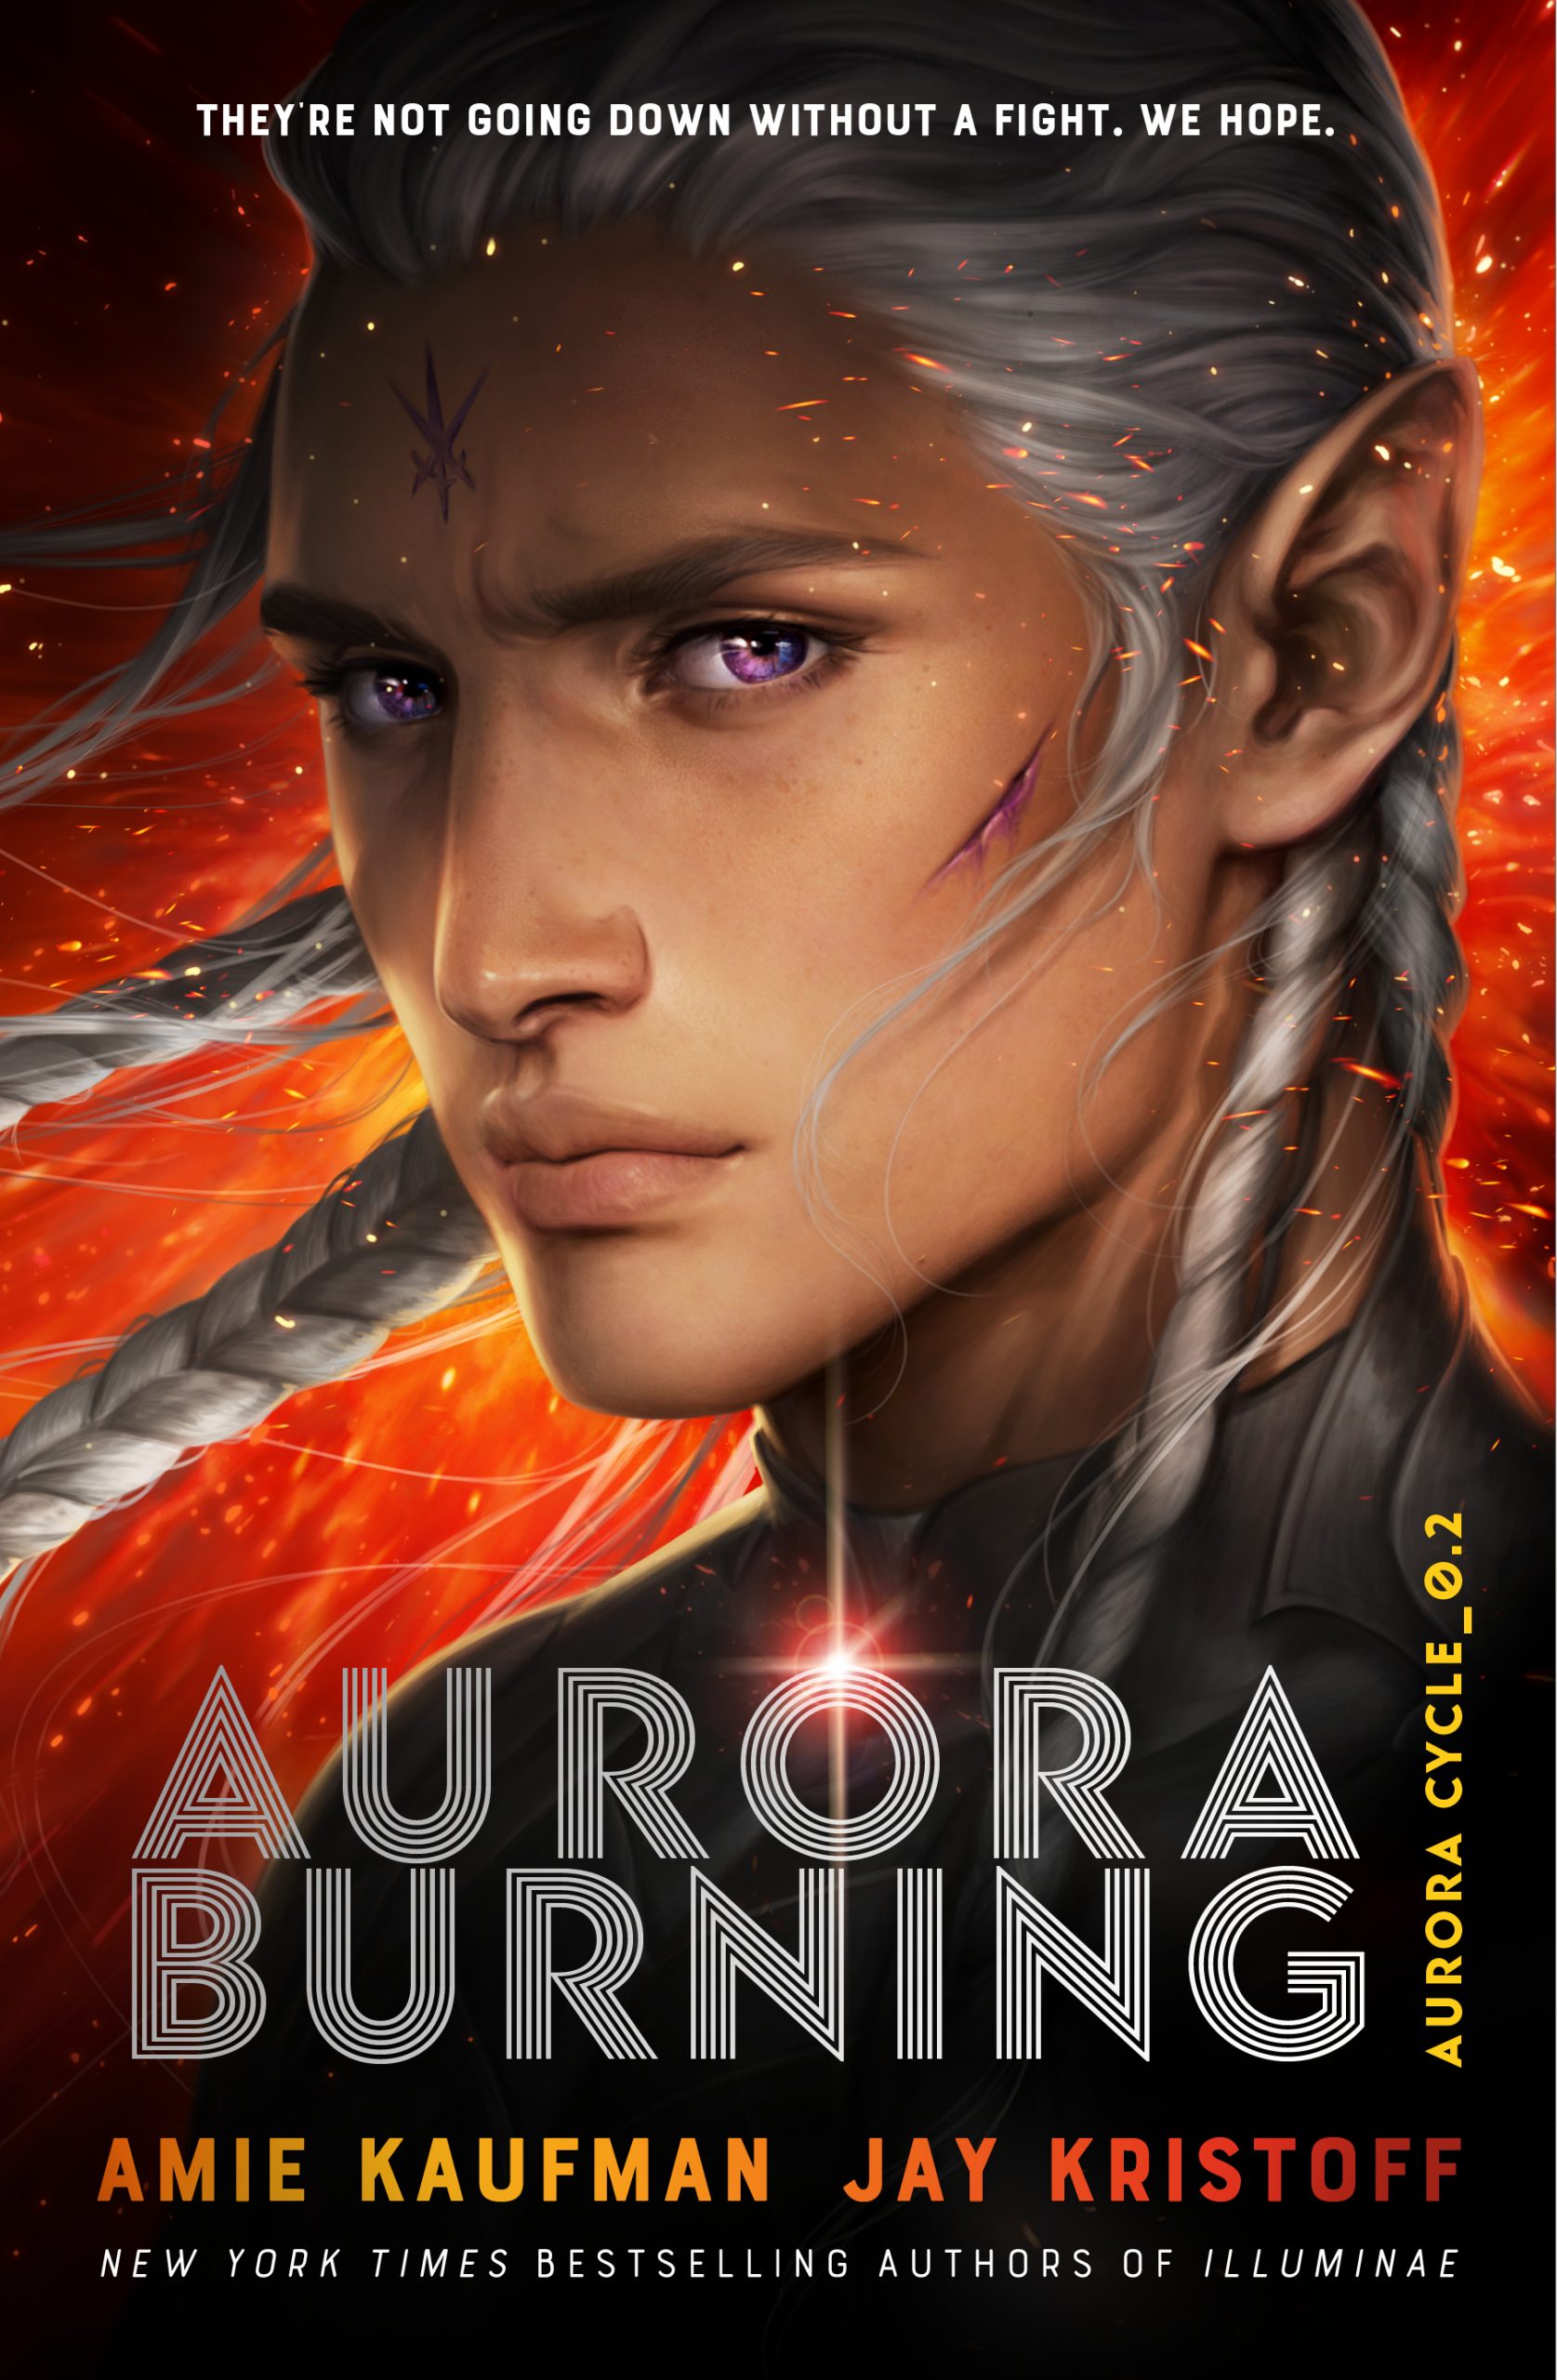 When Will Aurora Burning By Amie Kaufman & Jay Kristoff Come Out? 2020 YA Science Fiction